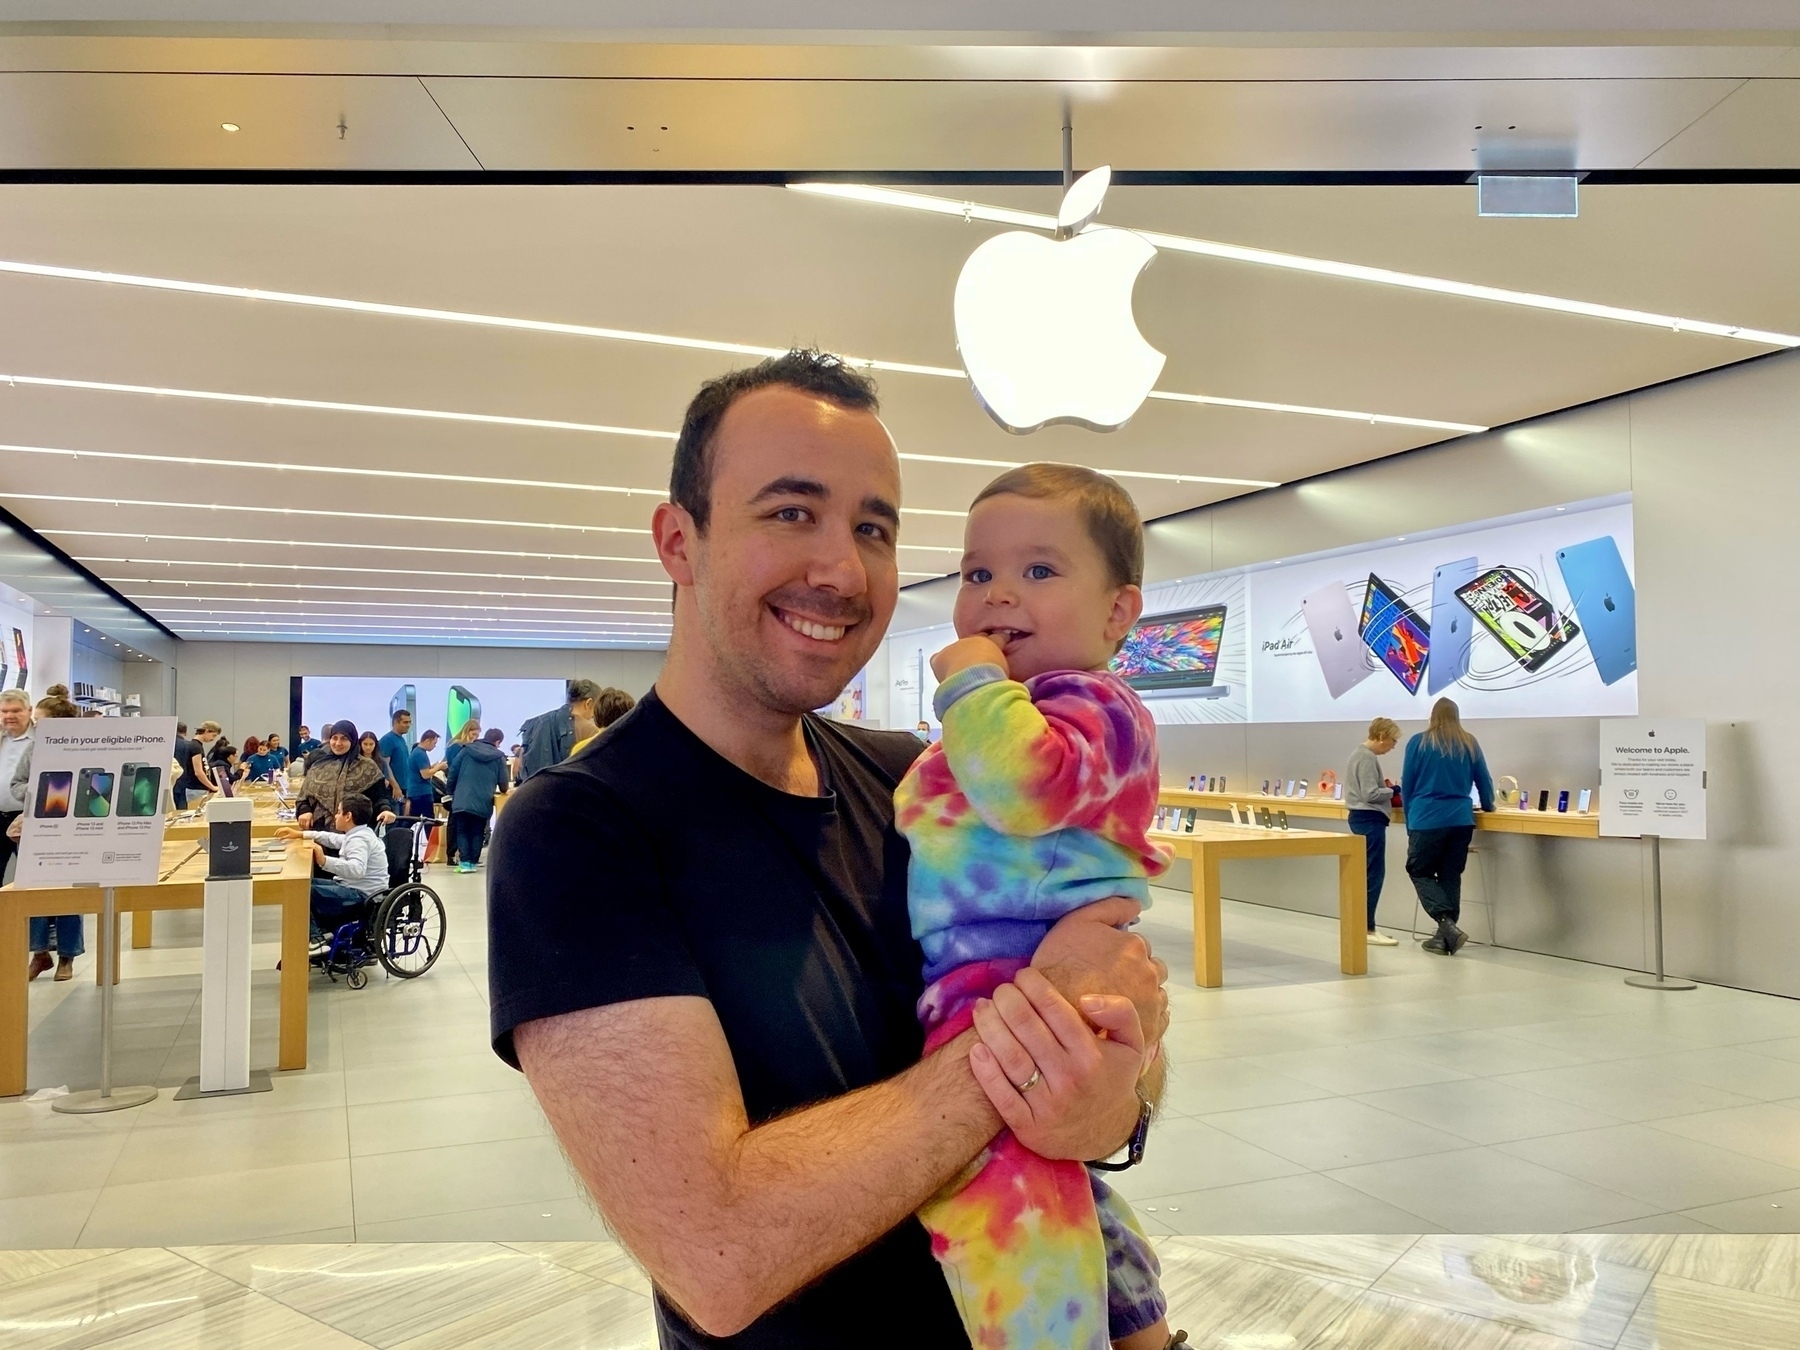 Martin holds Mac while standing in front of an Apple Store, with the company logo and display tables visible in the background